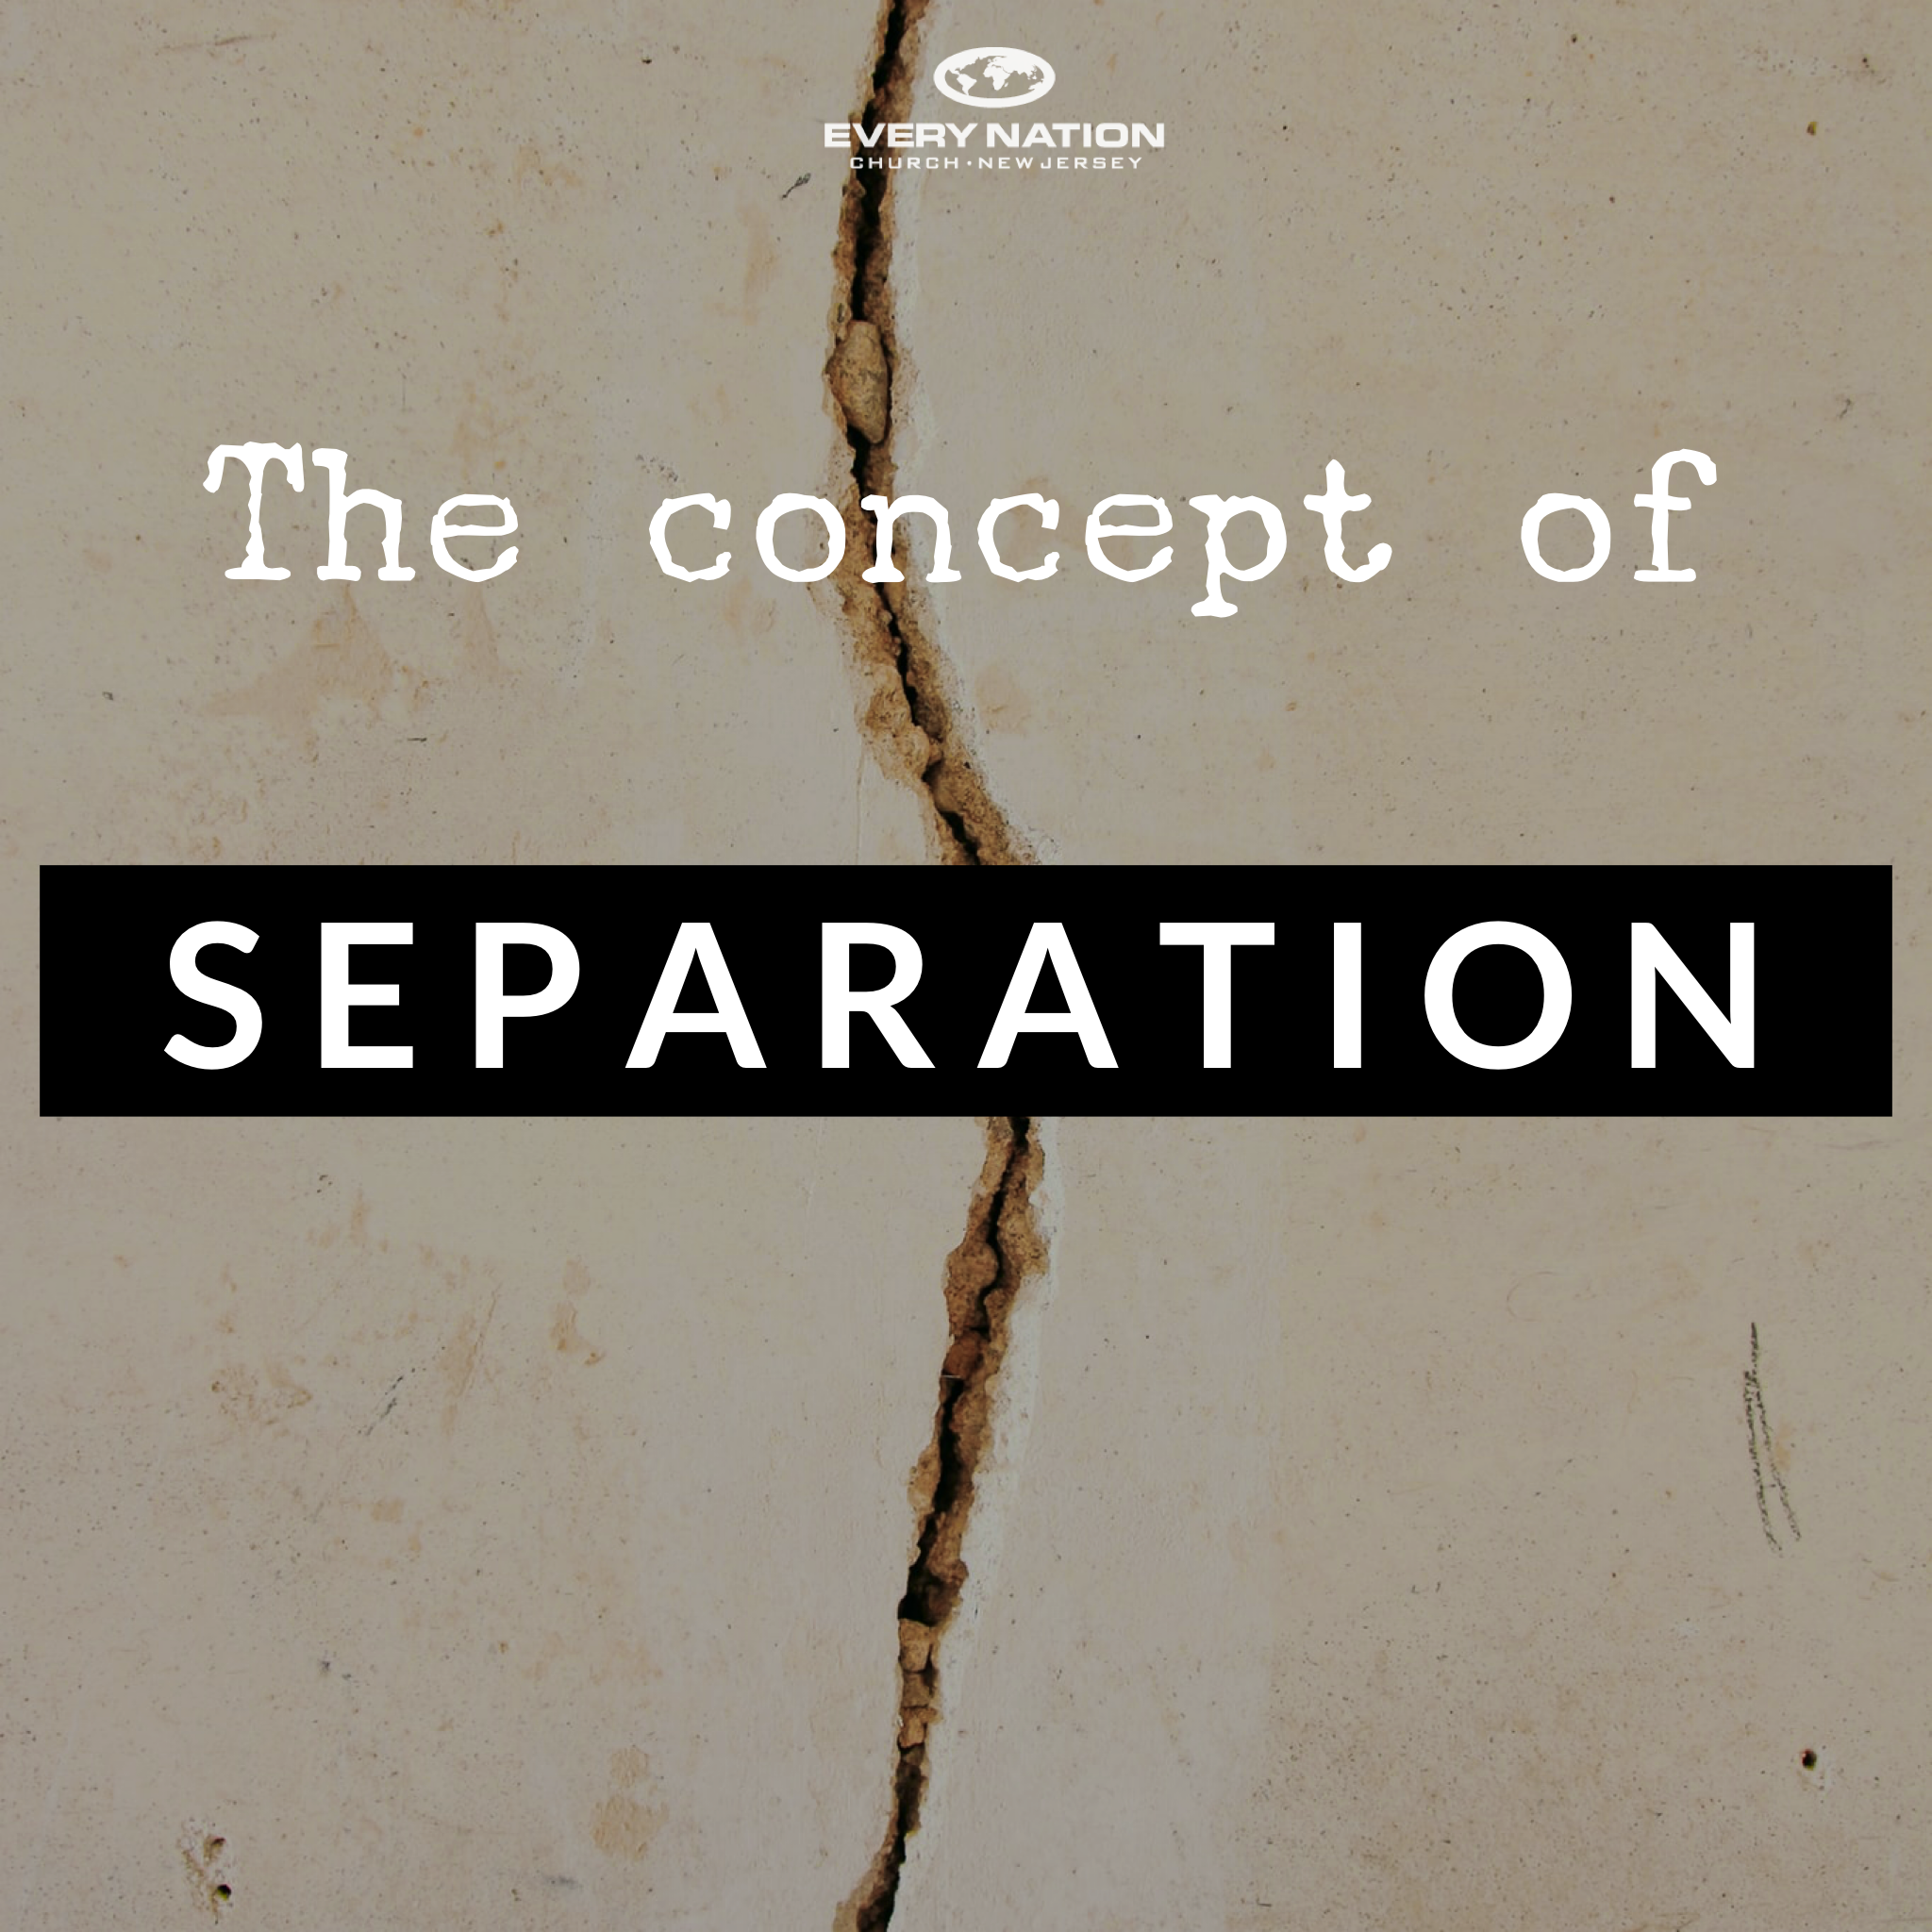 The Concept of Separation